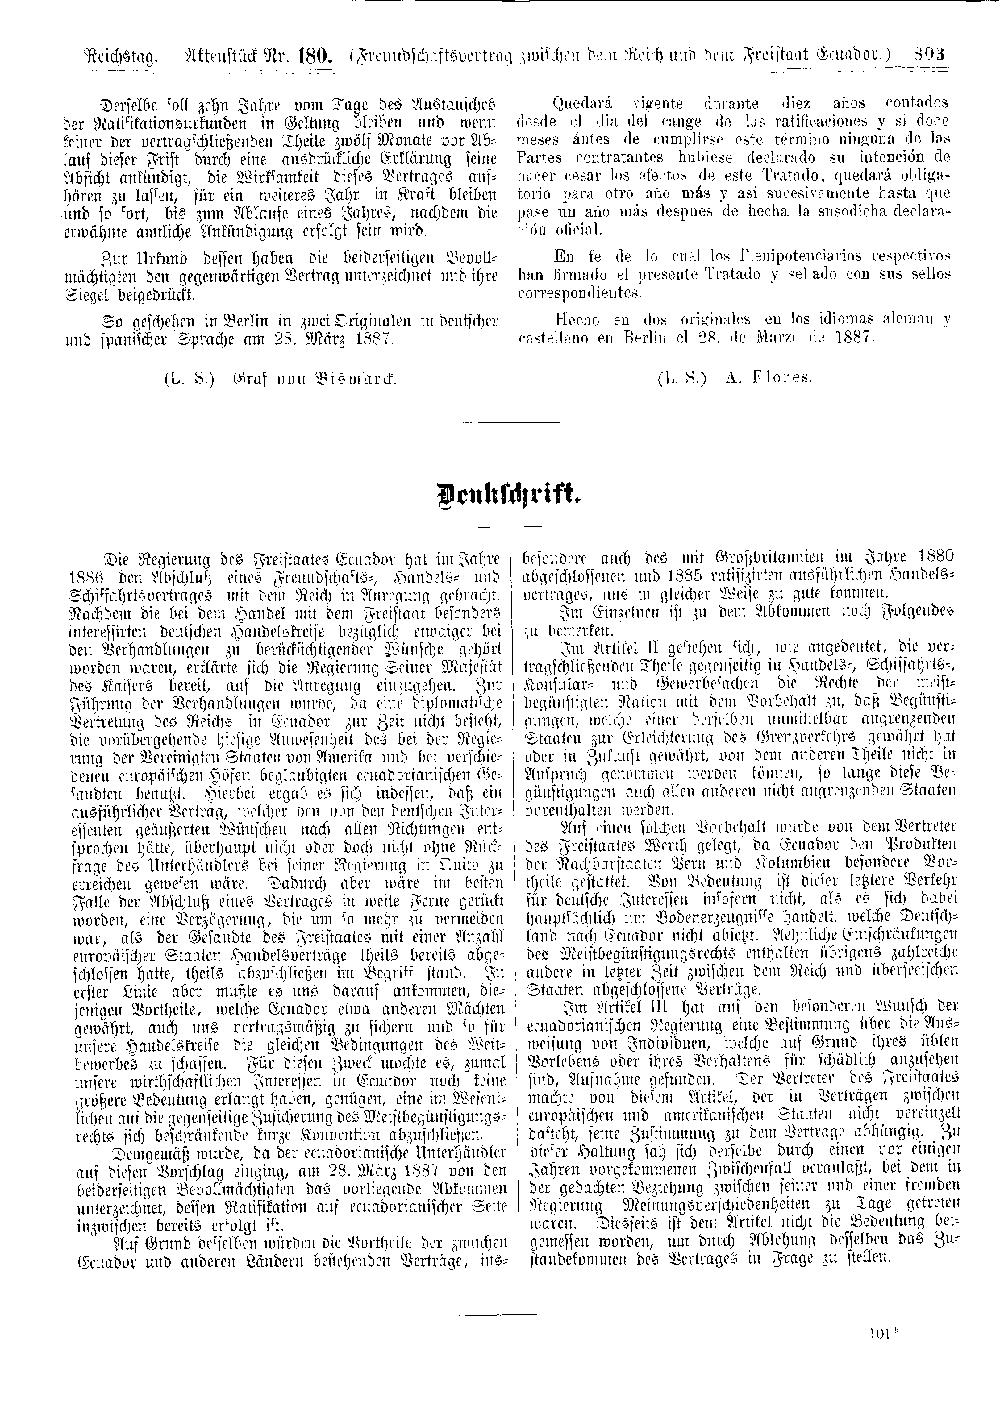 Scan of page 803